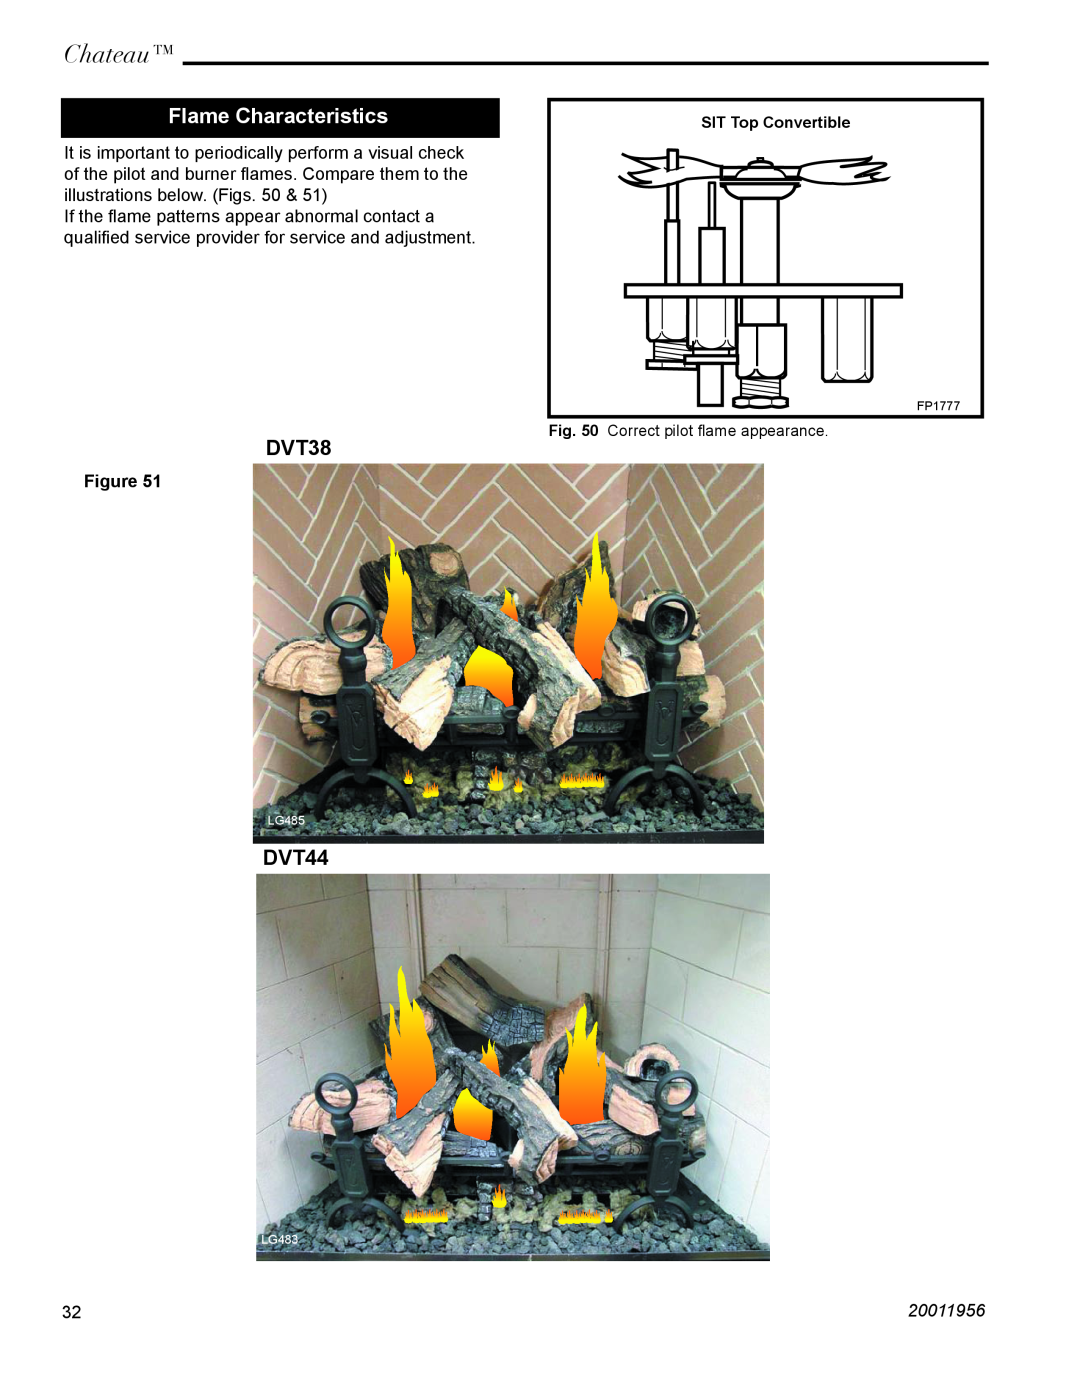 CFM Corporation DVT44IN, DVT38IN installation instructions Flame Characteristics, Chateau, 20011956 